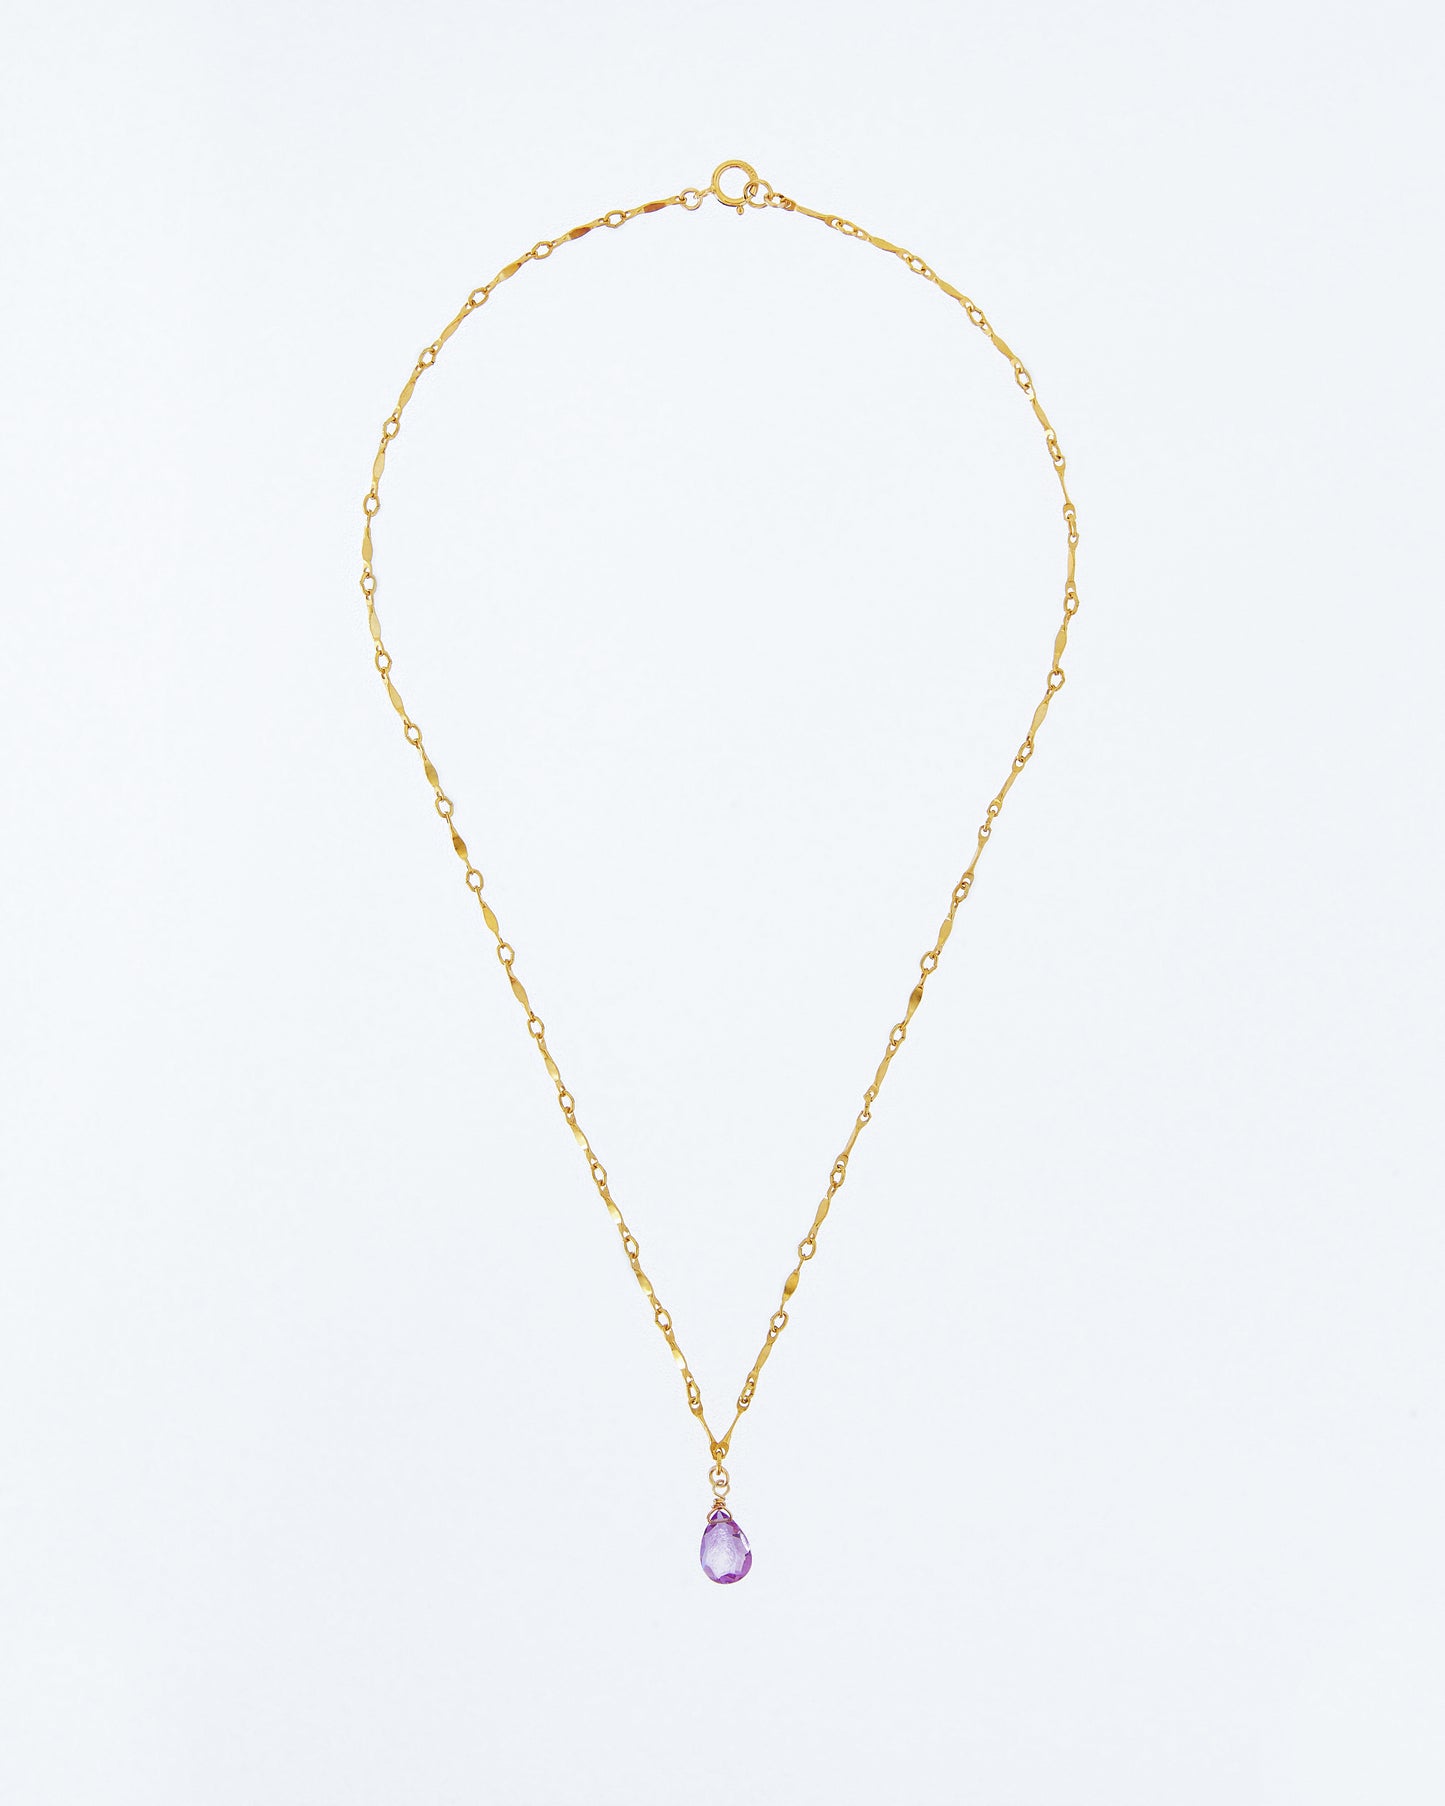 14K Gold Filled Amethyst Necklace | Inspiration Her Jewellery